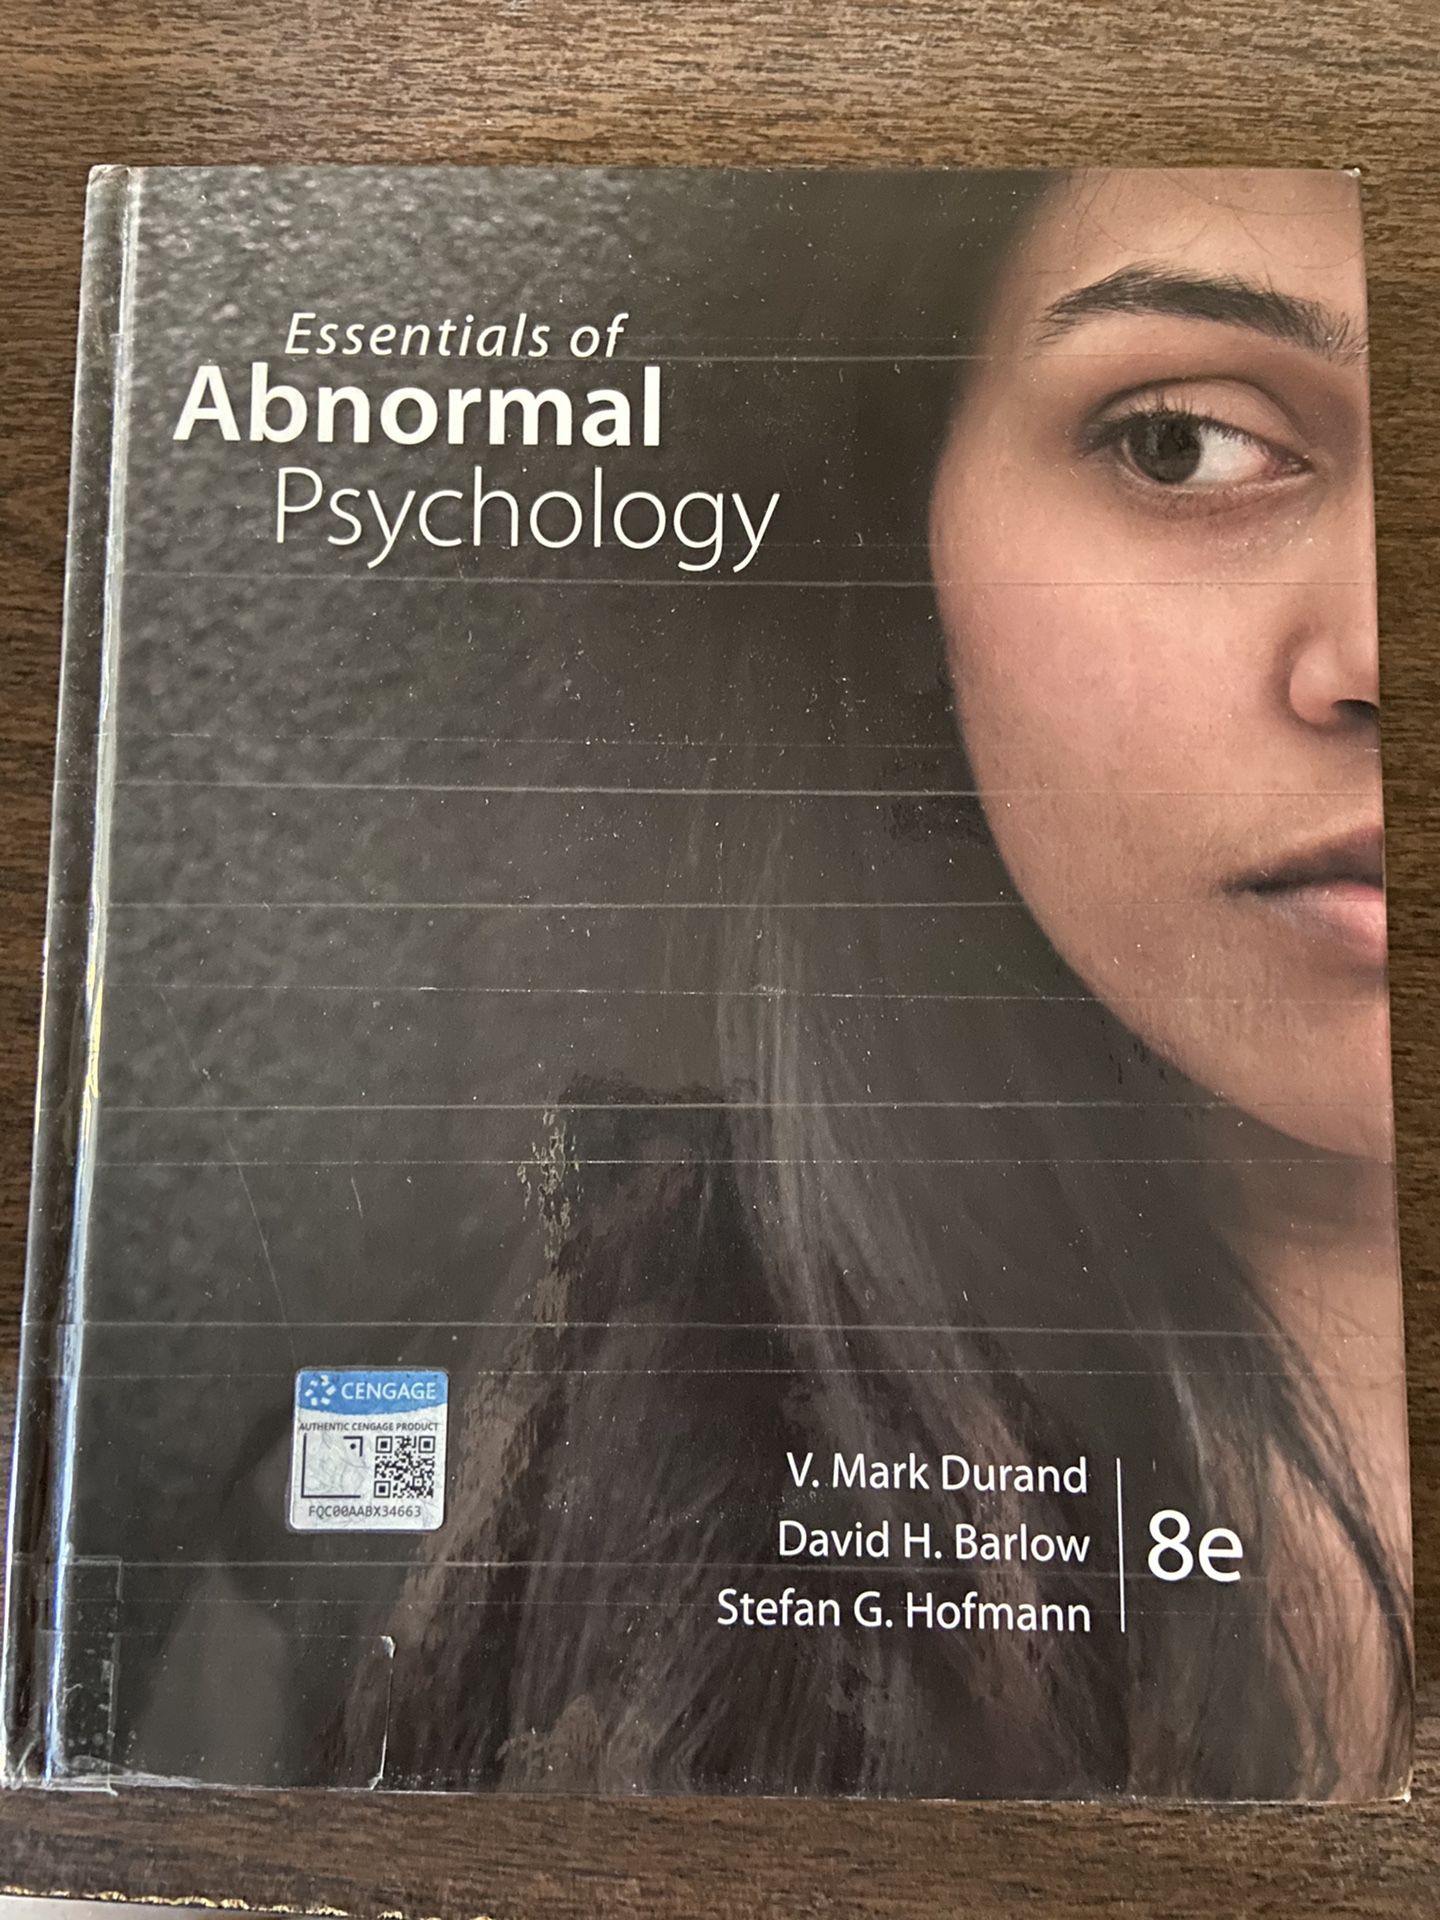 Essentials of Abnormal Psychology 8e